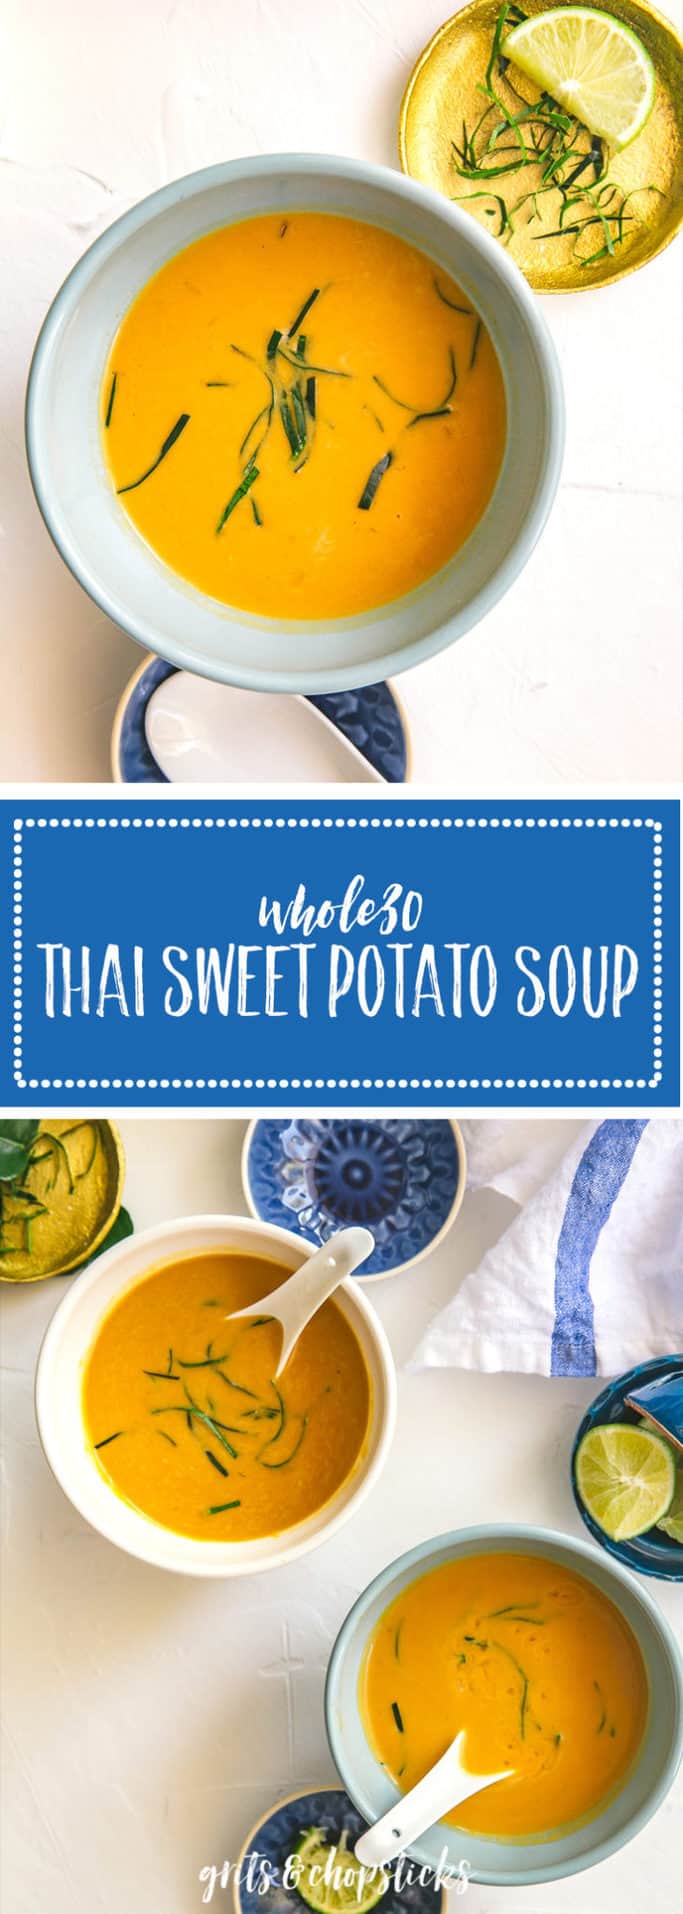 This Whole30/paleo Thai sweet potato soup is a great way to ease into healthier eating. Try it as a part of your dinner for a warm, comforting meal.